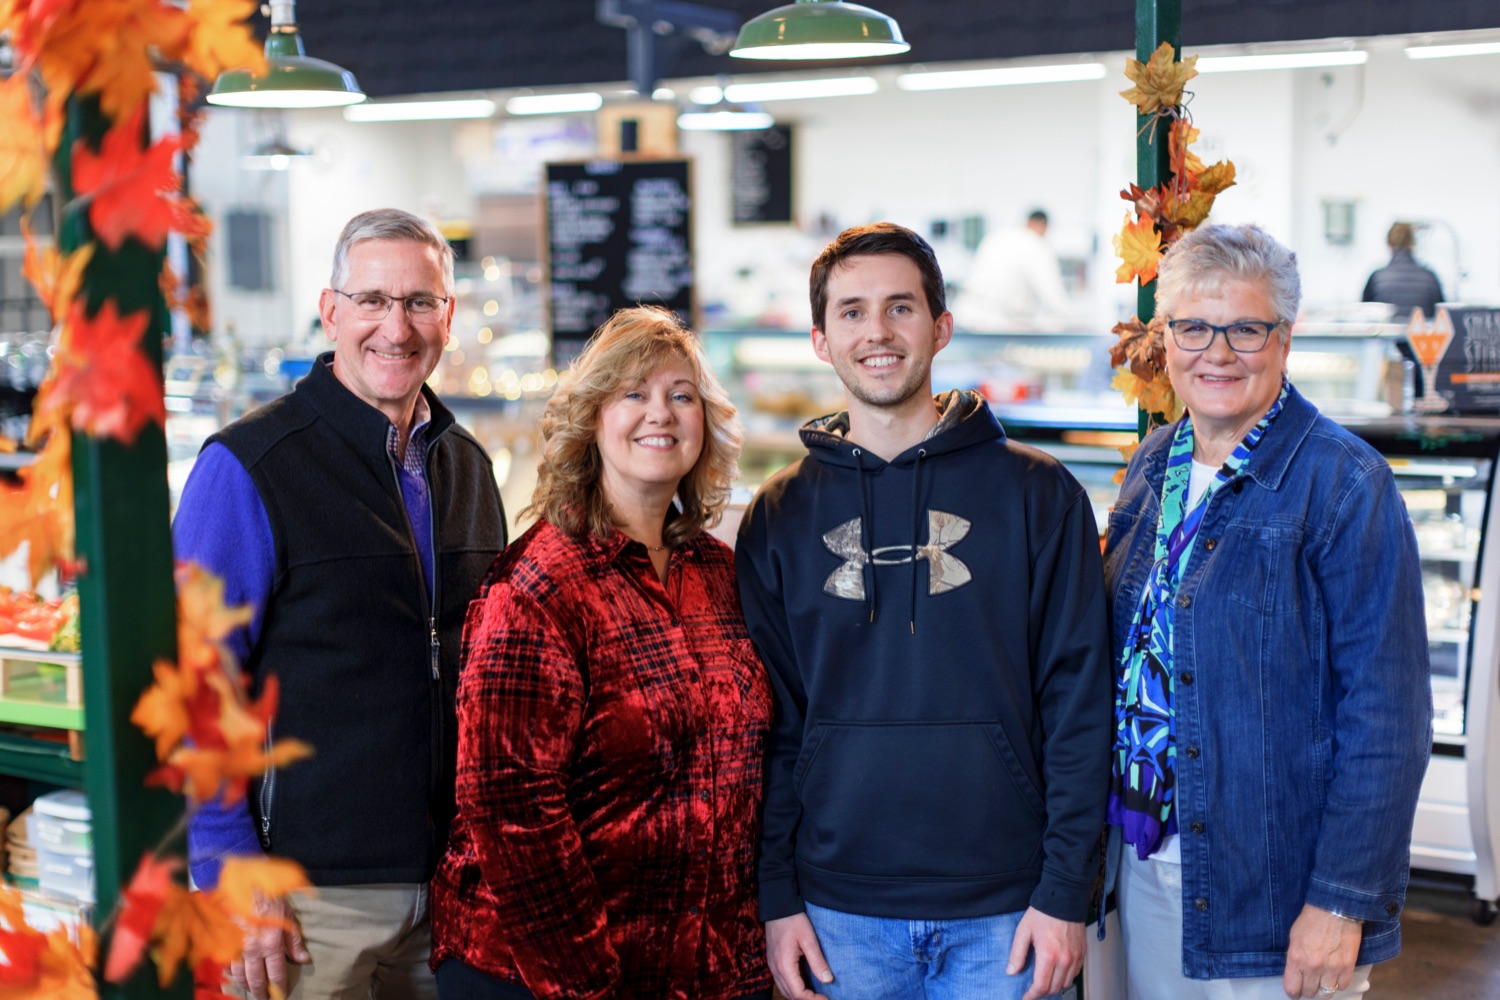 Agriculture Secretary Russell Redding, left, and First Lady of Agriculture Nina Redding, right, pose for a picture with Barb Fitz and her son, Isaac, at their produce stand, Dennis Fitz Produce, inside York Central Market House on Thursday, November 17, 2022.<br><a href="https://filesource.amperwave.net/commonwealthofpa/photo/22347_AG_Thanksgiving_Shopping_NK_018.JPG" target="_blank">⇣ Download Photo</a>